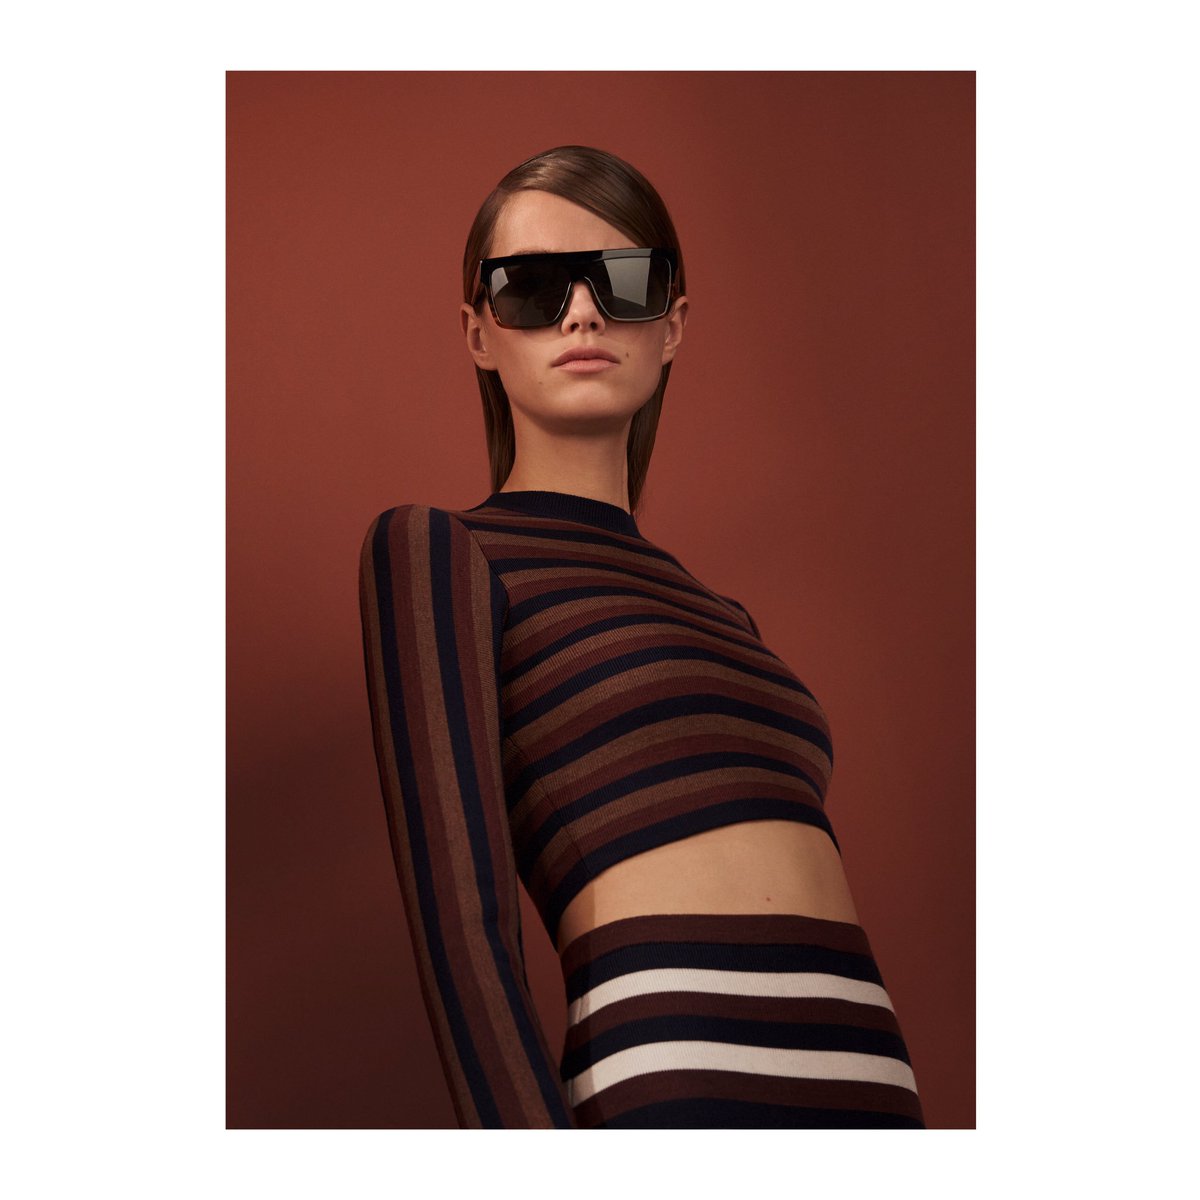 Excited to be launching my new season eyewear collection! In stores & online now at https://t.co/LSOlV6sx9j x vb https://t.co/SvTa8ZpUn5